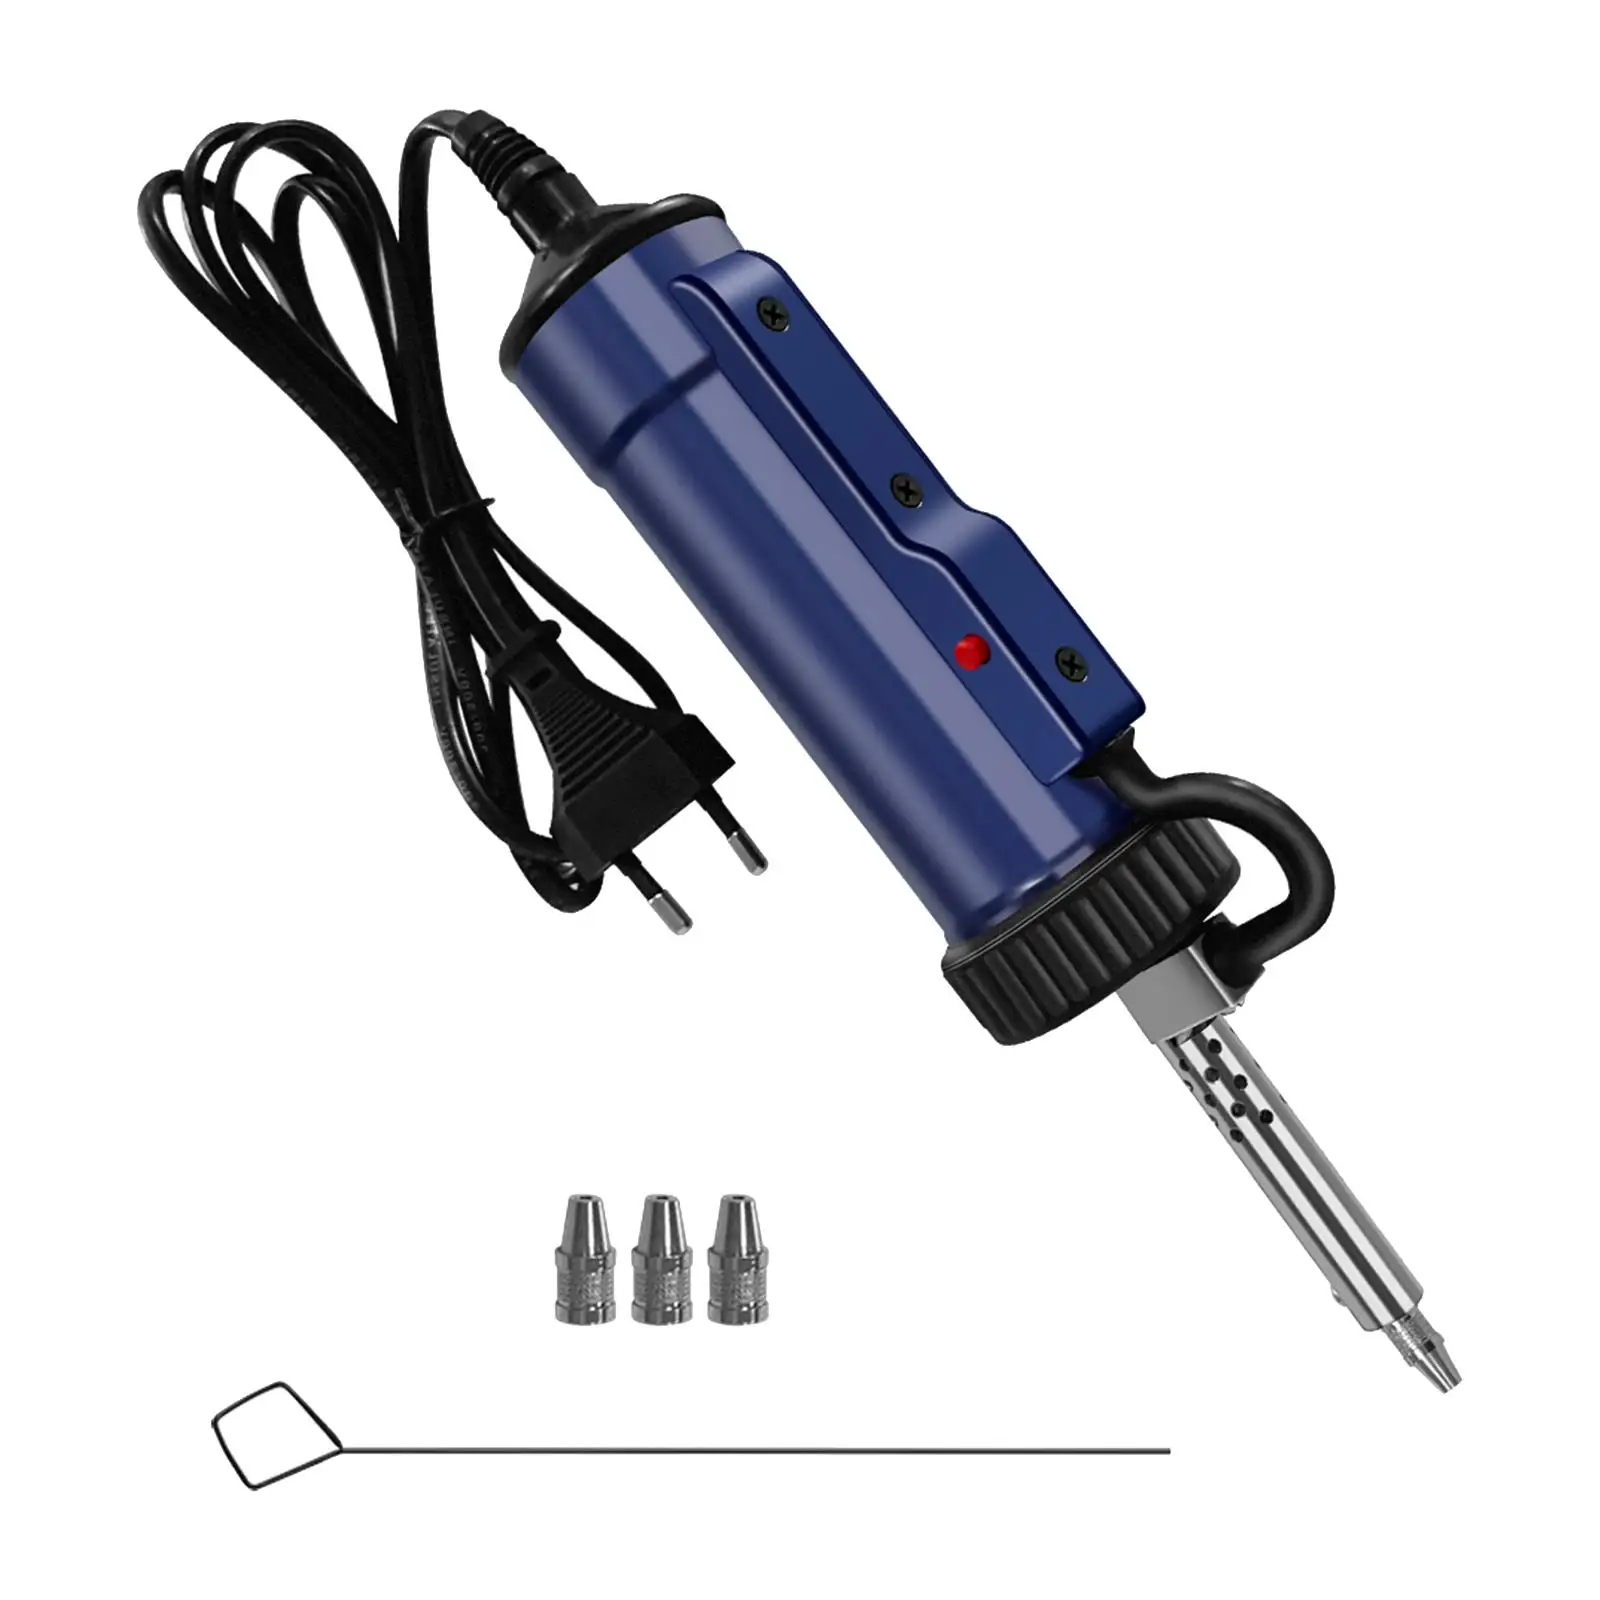 Automatic Desoldering Pump DIY with Suction Tips Electric Solder Tin Suckers Solder Iron for Jewelry Home DIY Hobby